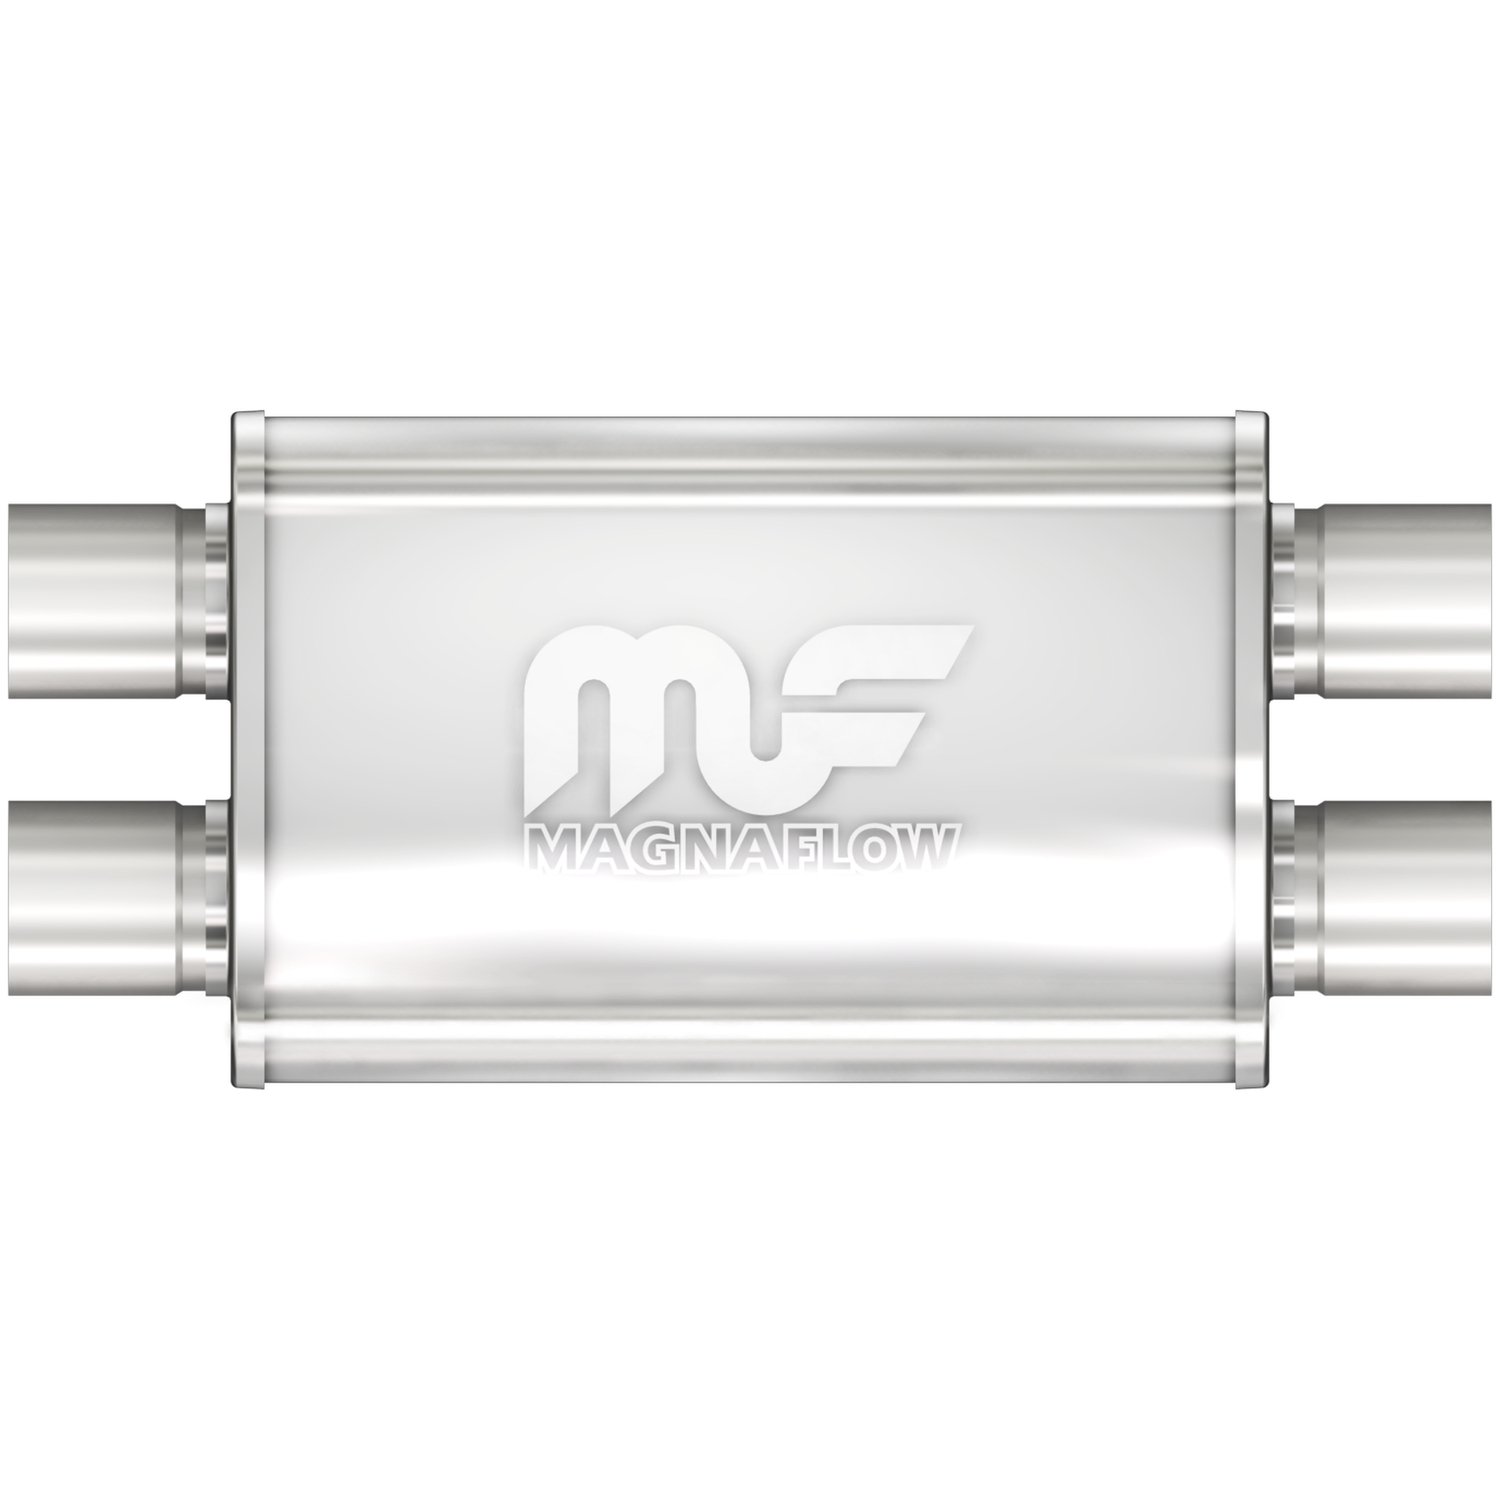 4" x 9" Oval Muffler Dual In/Dual Out: 2.25" Body Length: 11" Overall Length: 17" Core Size: 2.5" Satin Finish